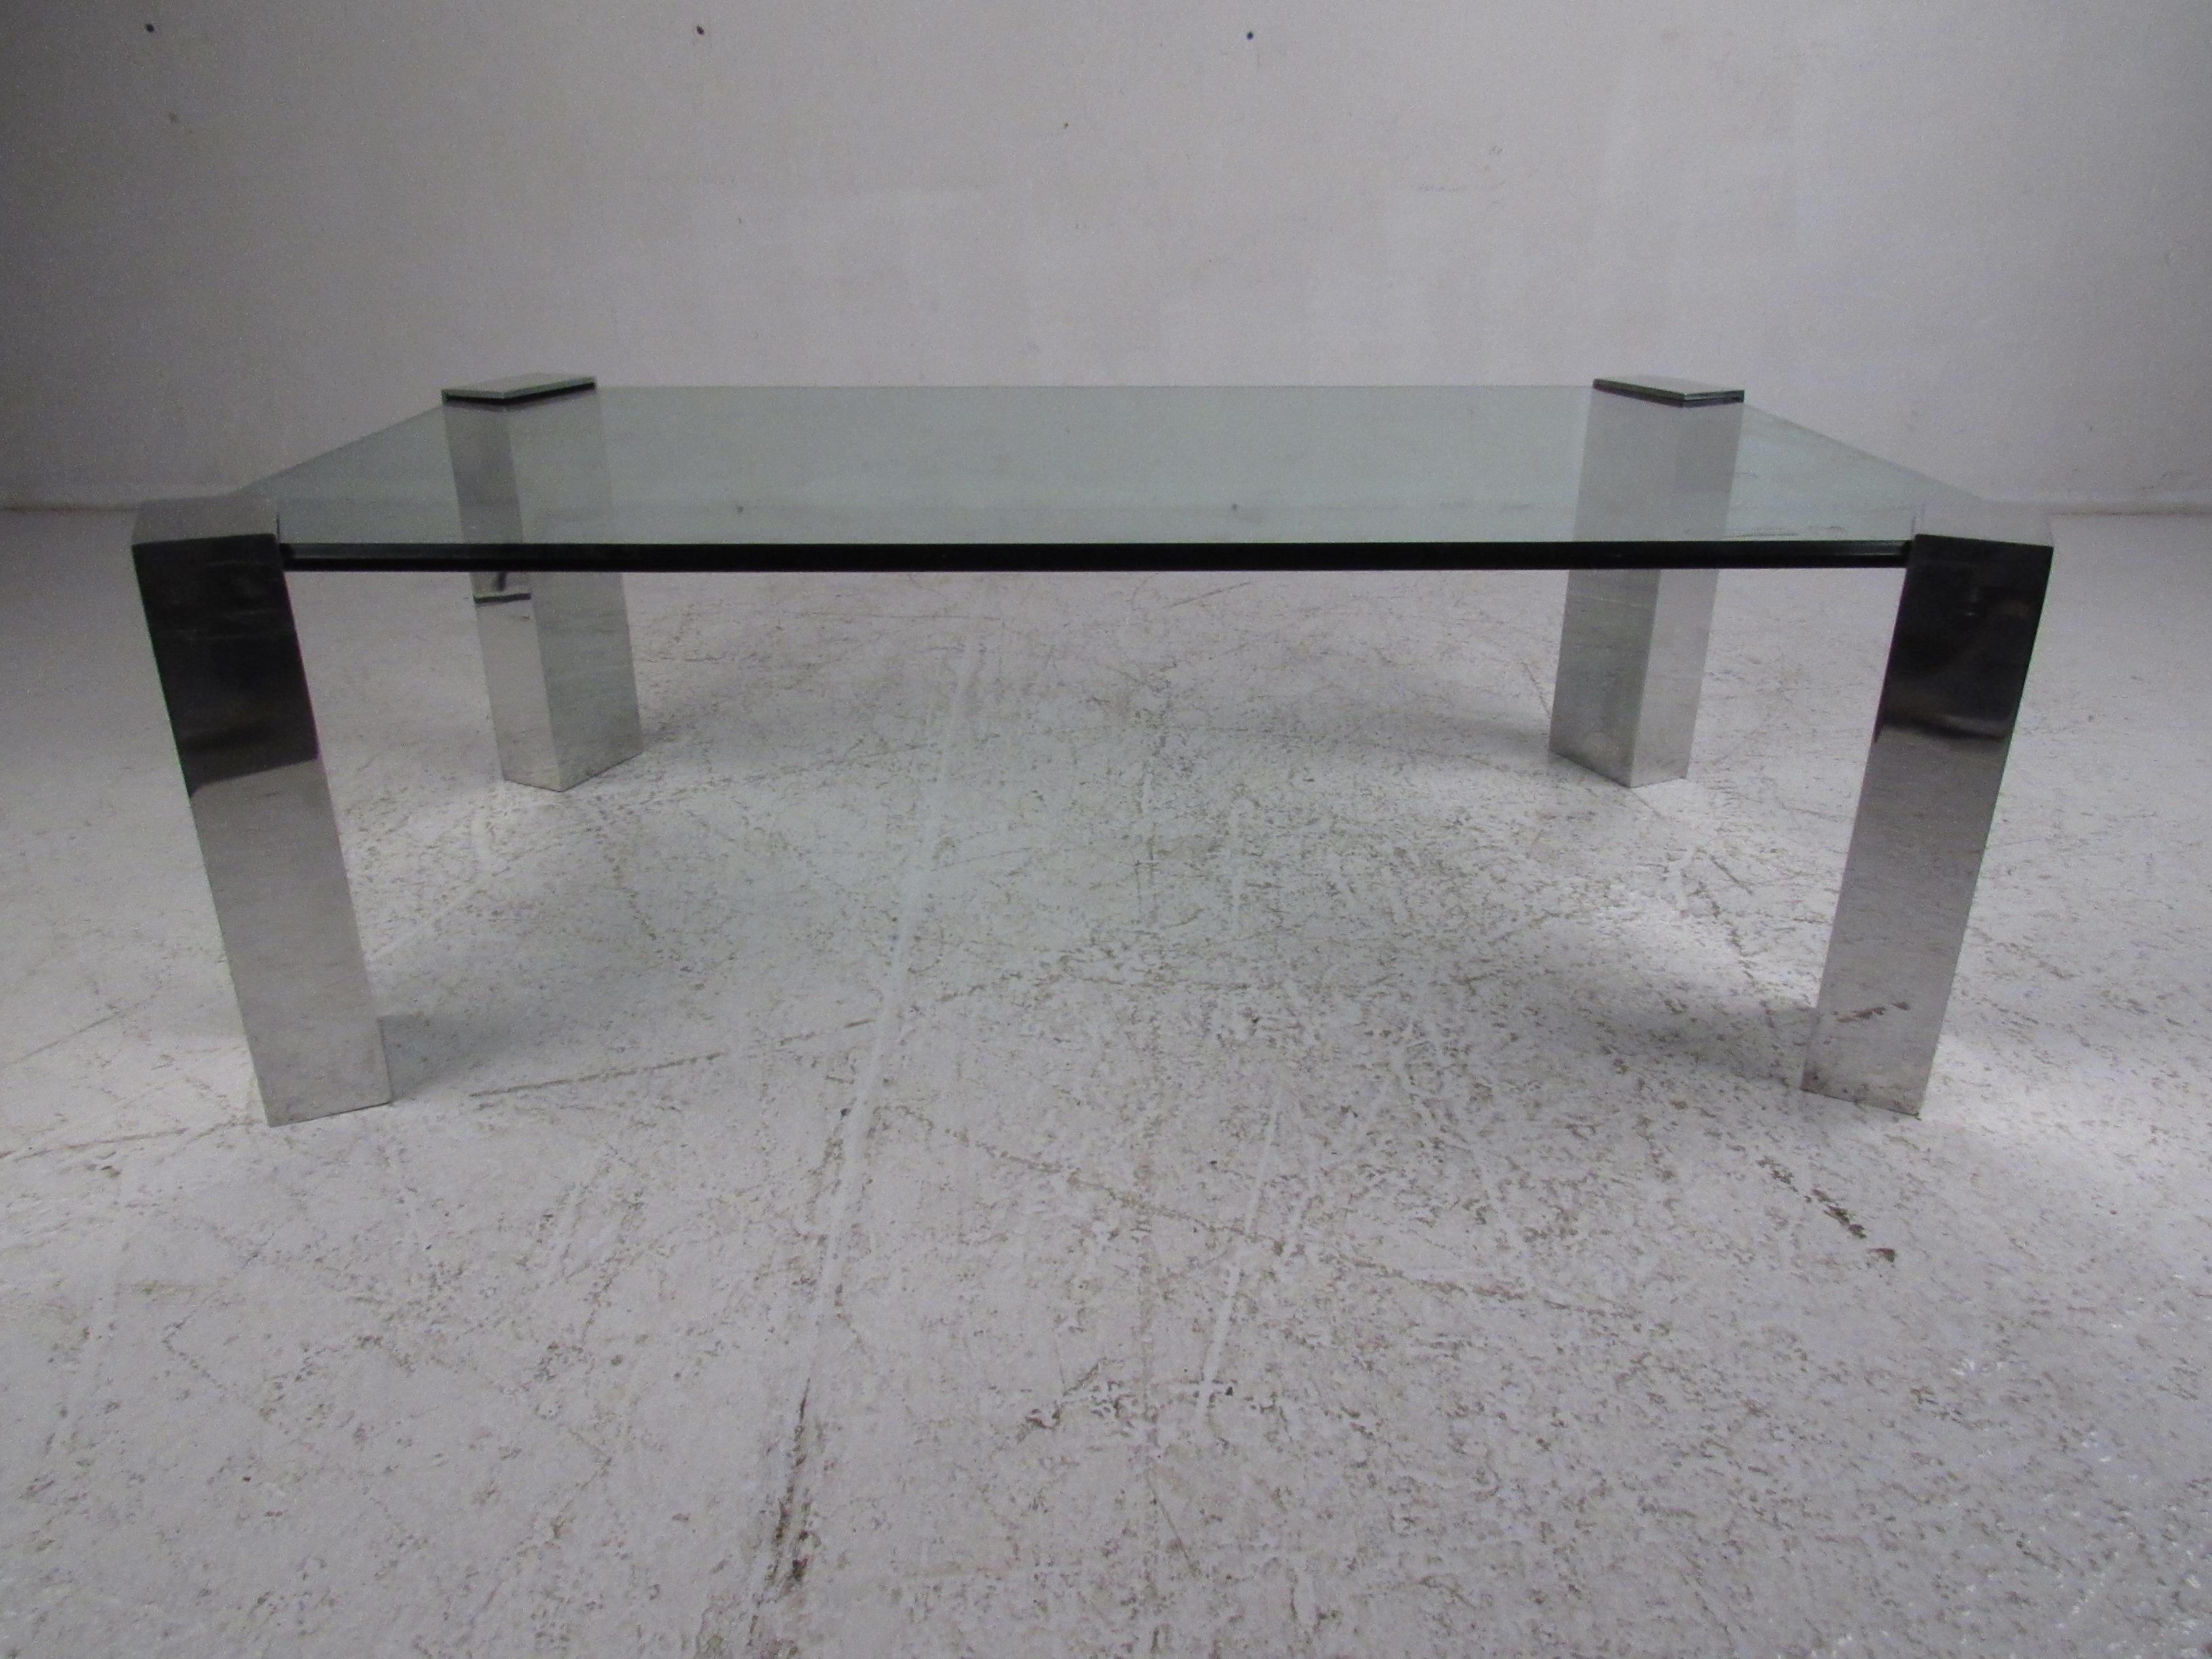 A uniquely designed table that boasts 3/4 inch glass resting comfortably inside of four individual chrome legs. The rectangular chrome legs ensure sturdiness and style in any modern interior. A stunning vintage modern coffee table with thick beveled